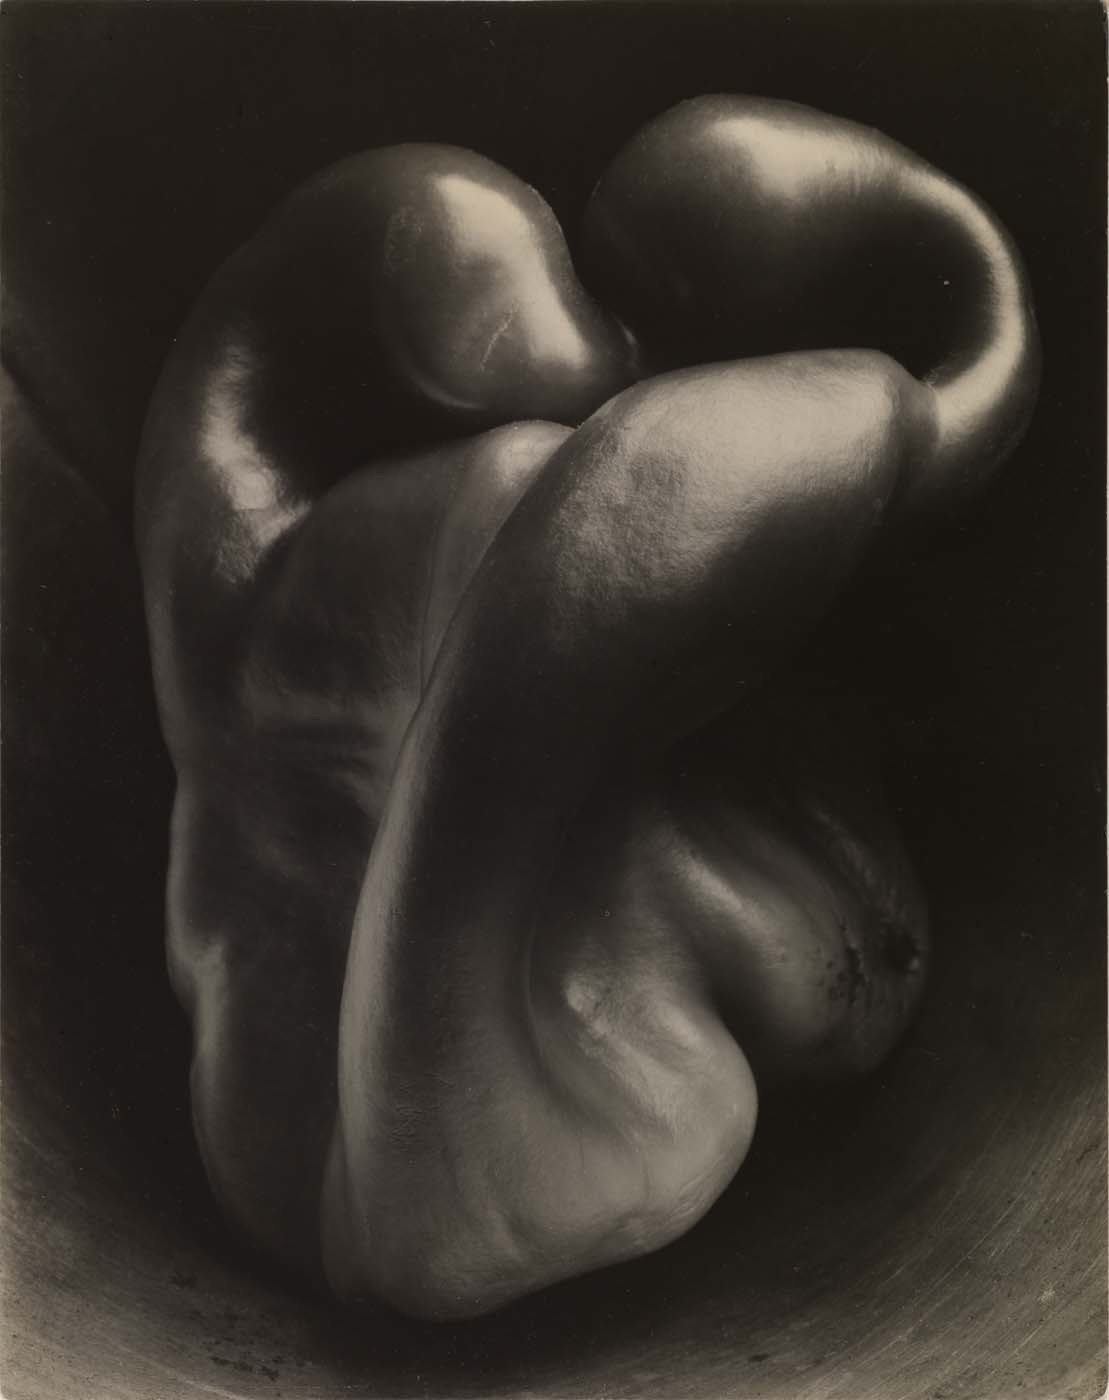 10 Timeless Lessons Edward Weston Can Teach You About Photography